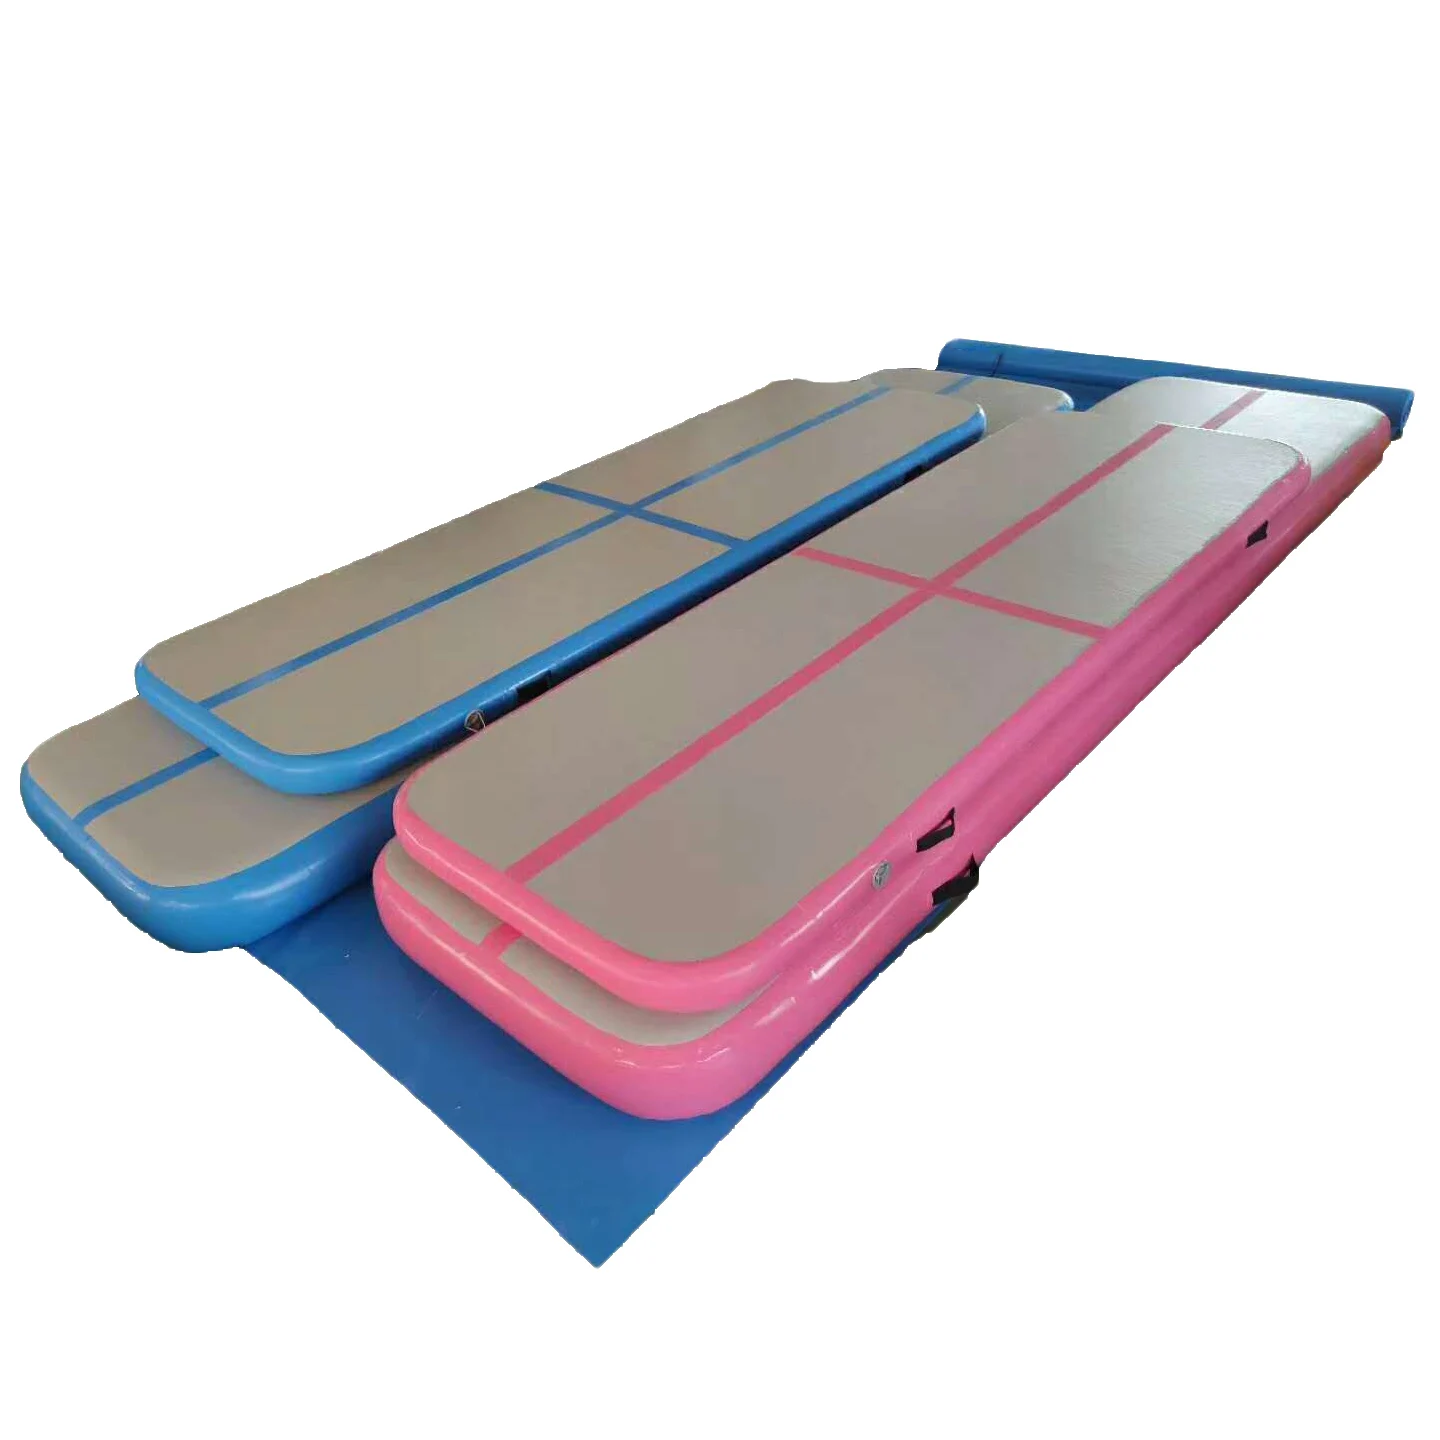 

Customized logo inflatable airtrack air floor 3m 4m 5m 6m 8m 10m 12m inflatable air track for sale, Pink/blue/gray or customized